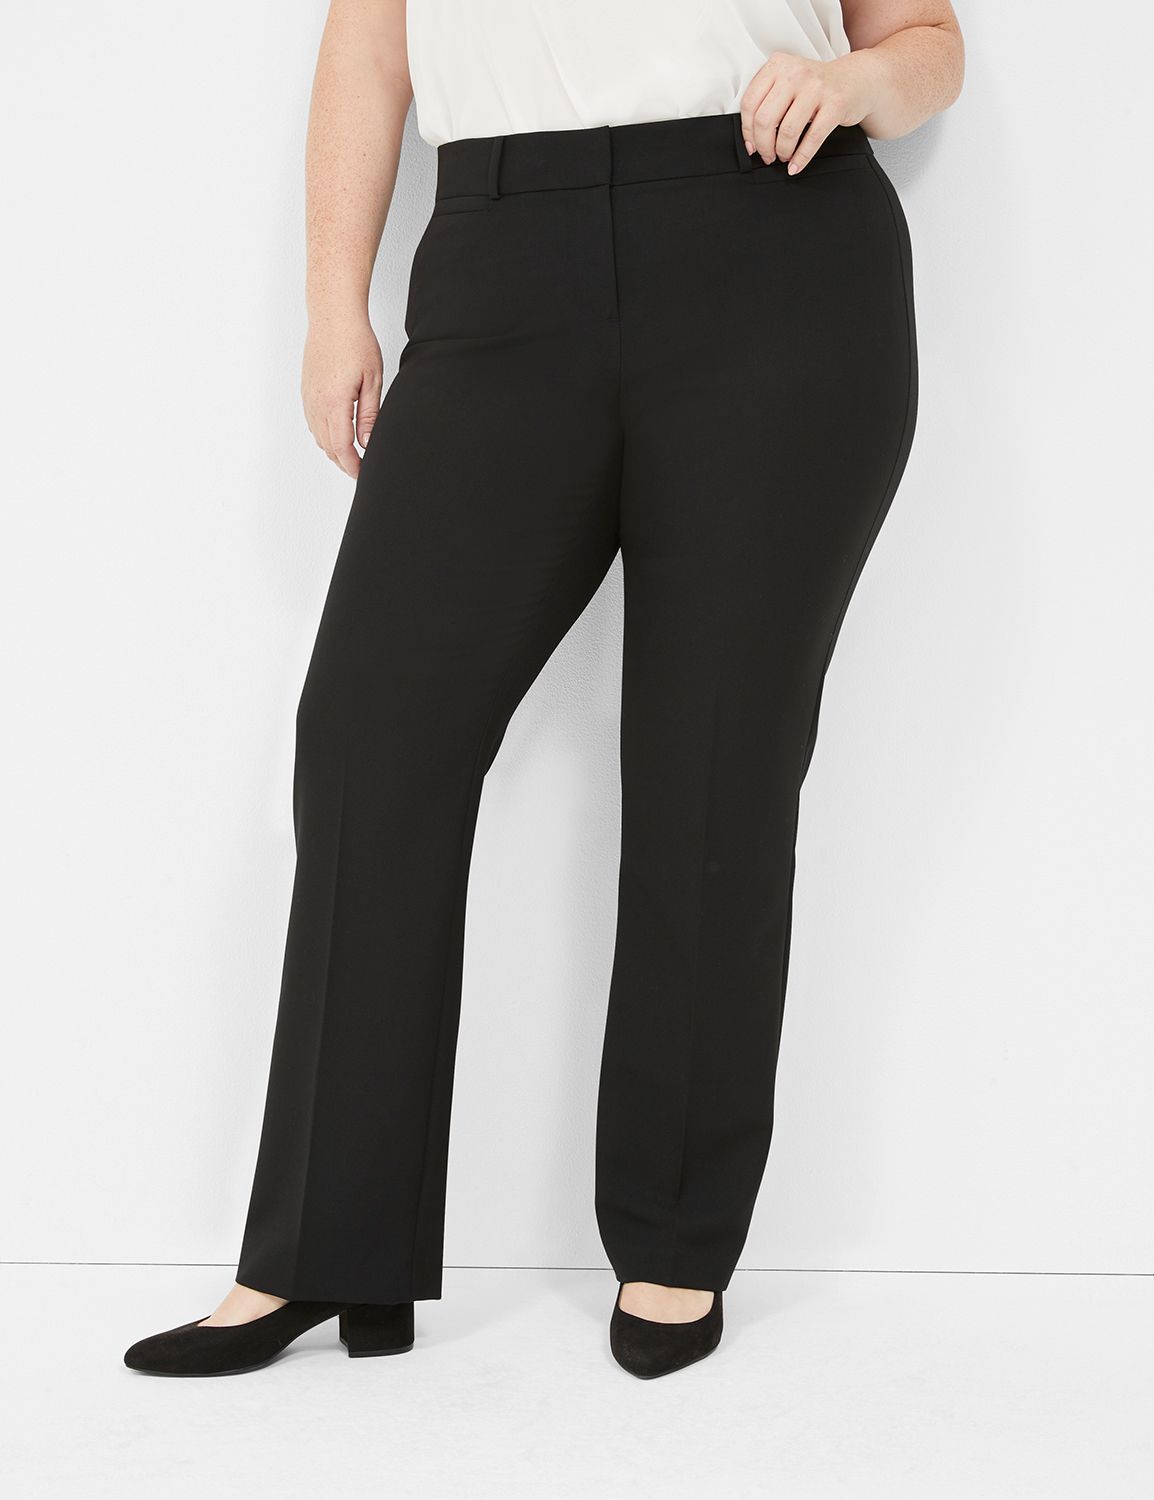  Maryia Stretchy Wide Leg Palazzo Dress Pants for Women